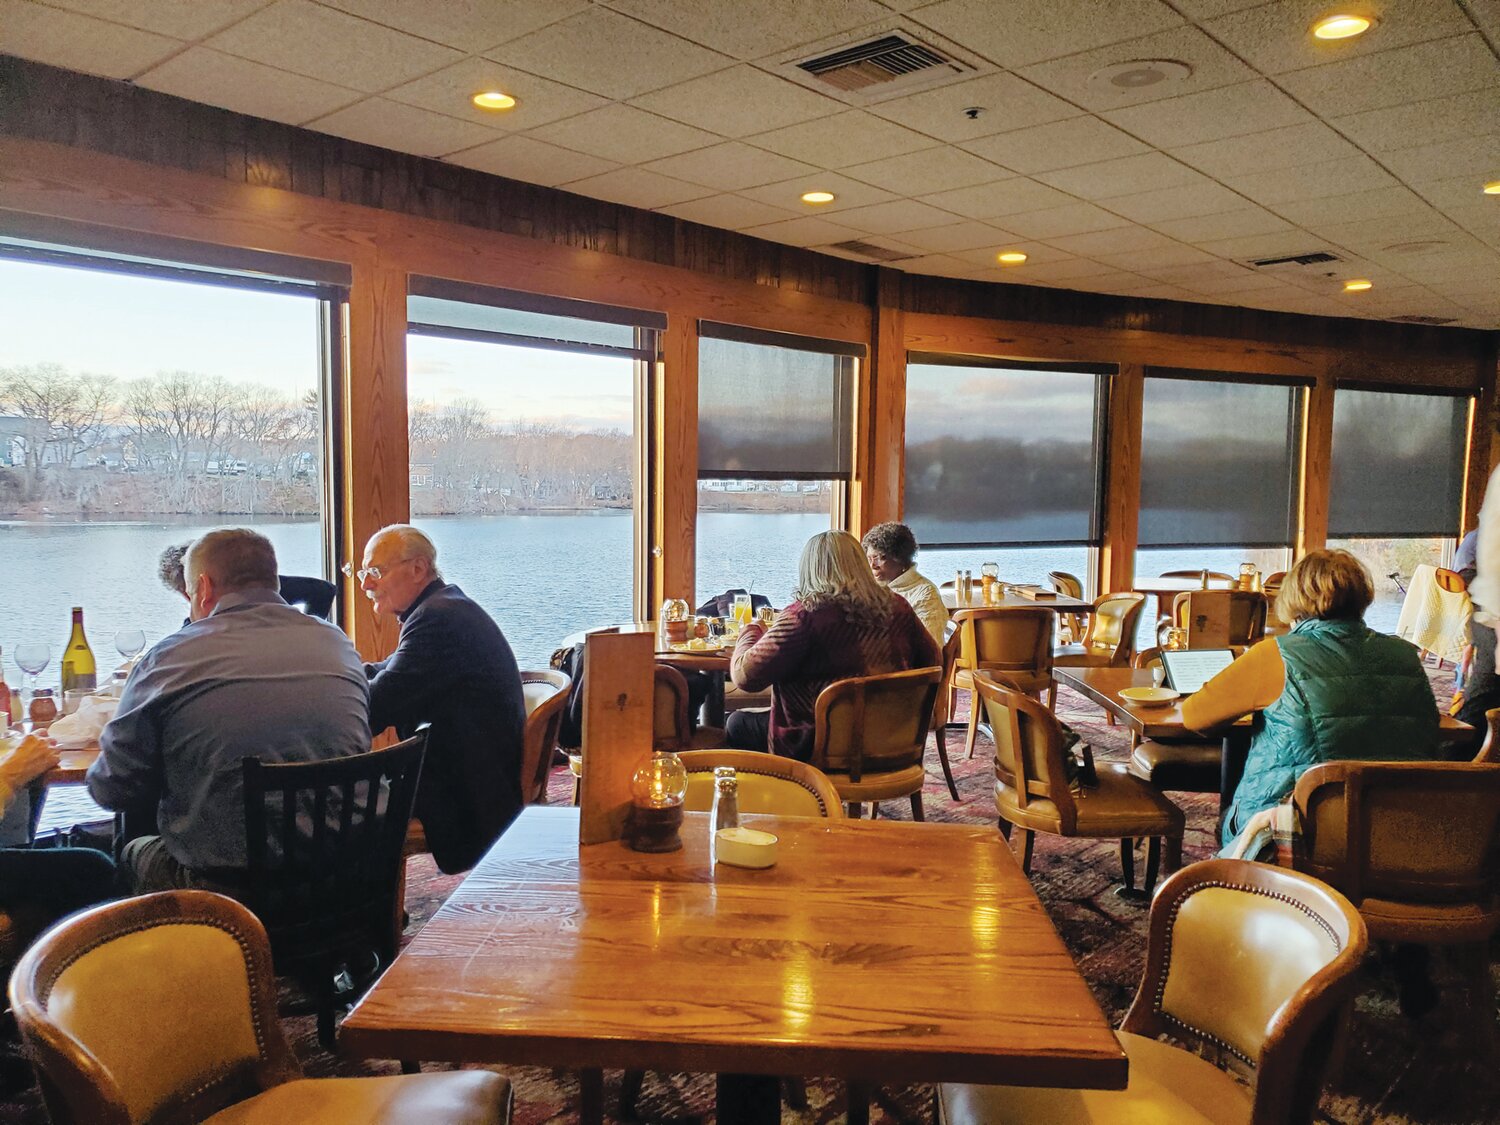 THE BACKROOM: An early dinner crowd in one of Twin Oaks’ most scenic dining rooms where the bartender is ready to serve Ferro’s favorite wine or Regine’s martini.